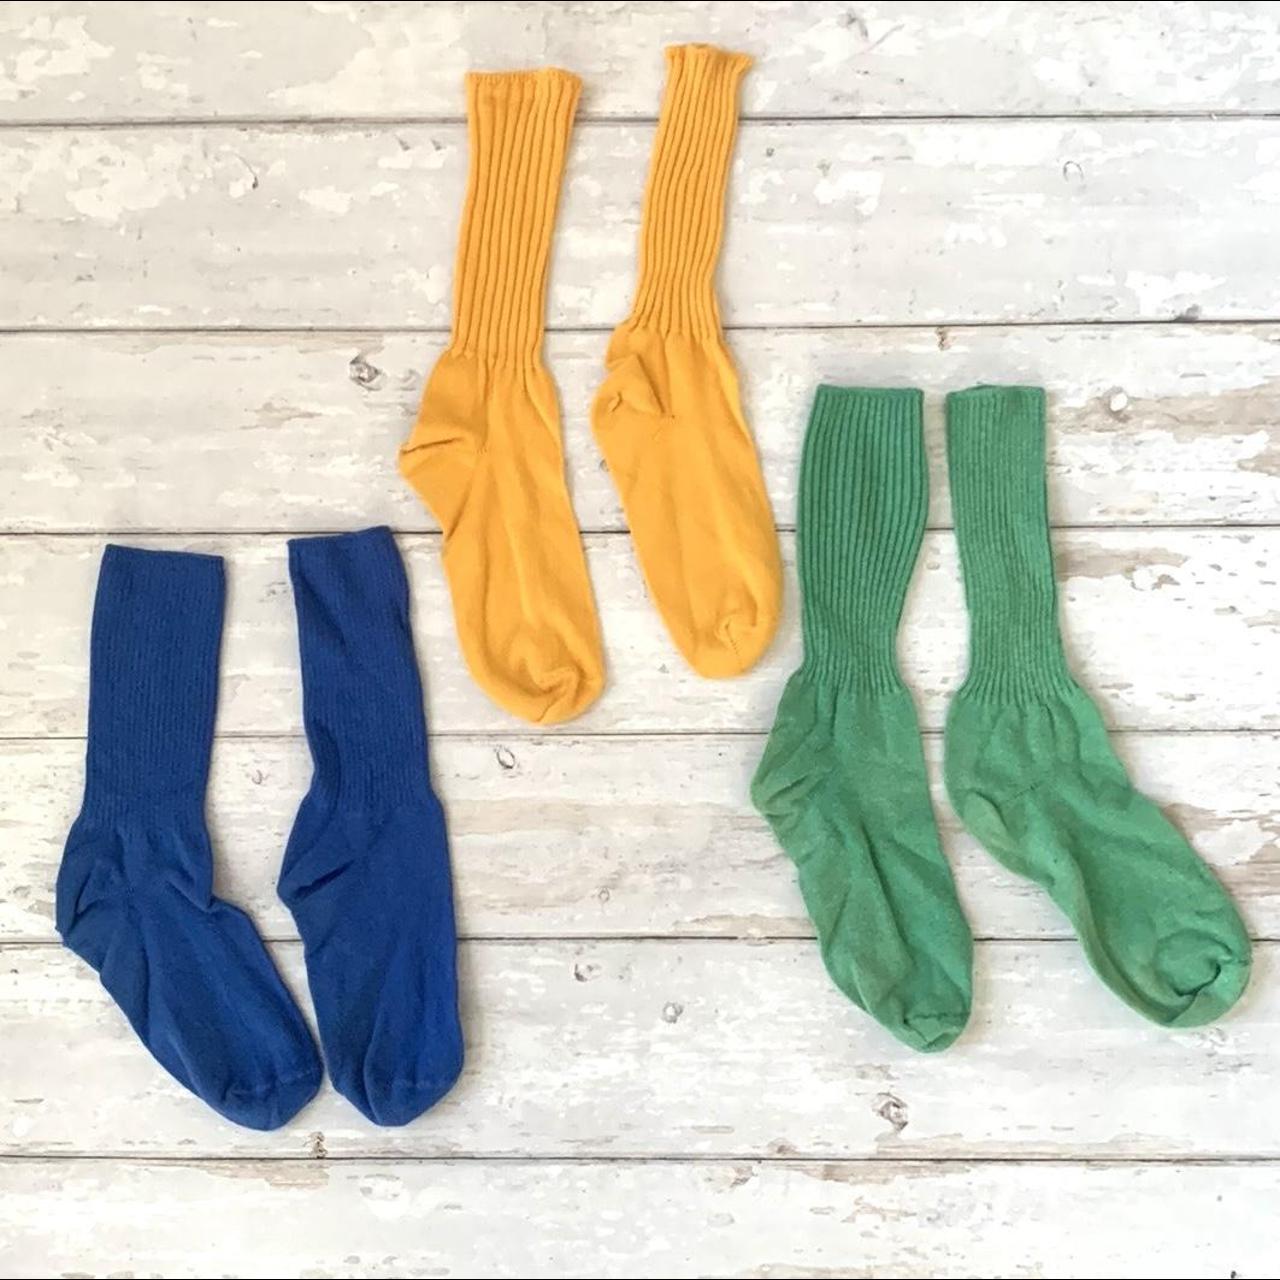 PacSun Men's Green and Blue Socks